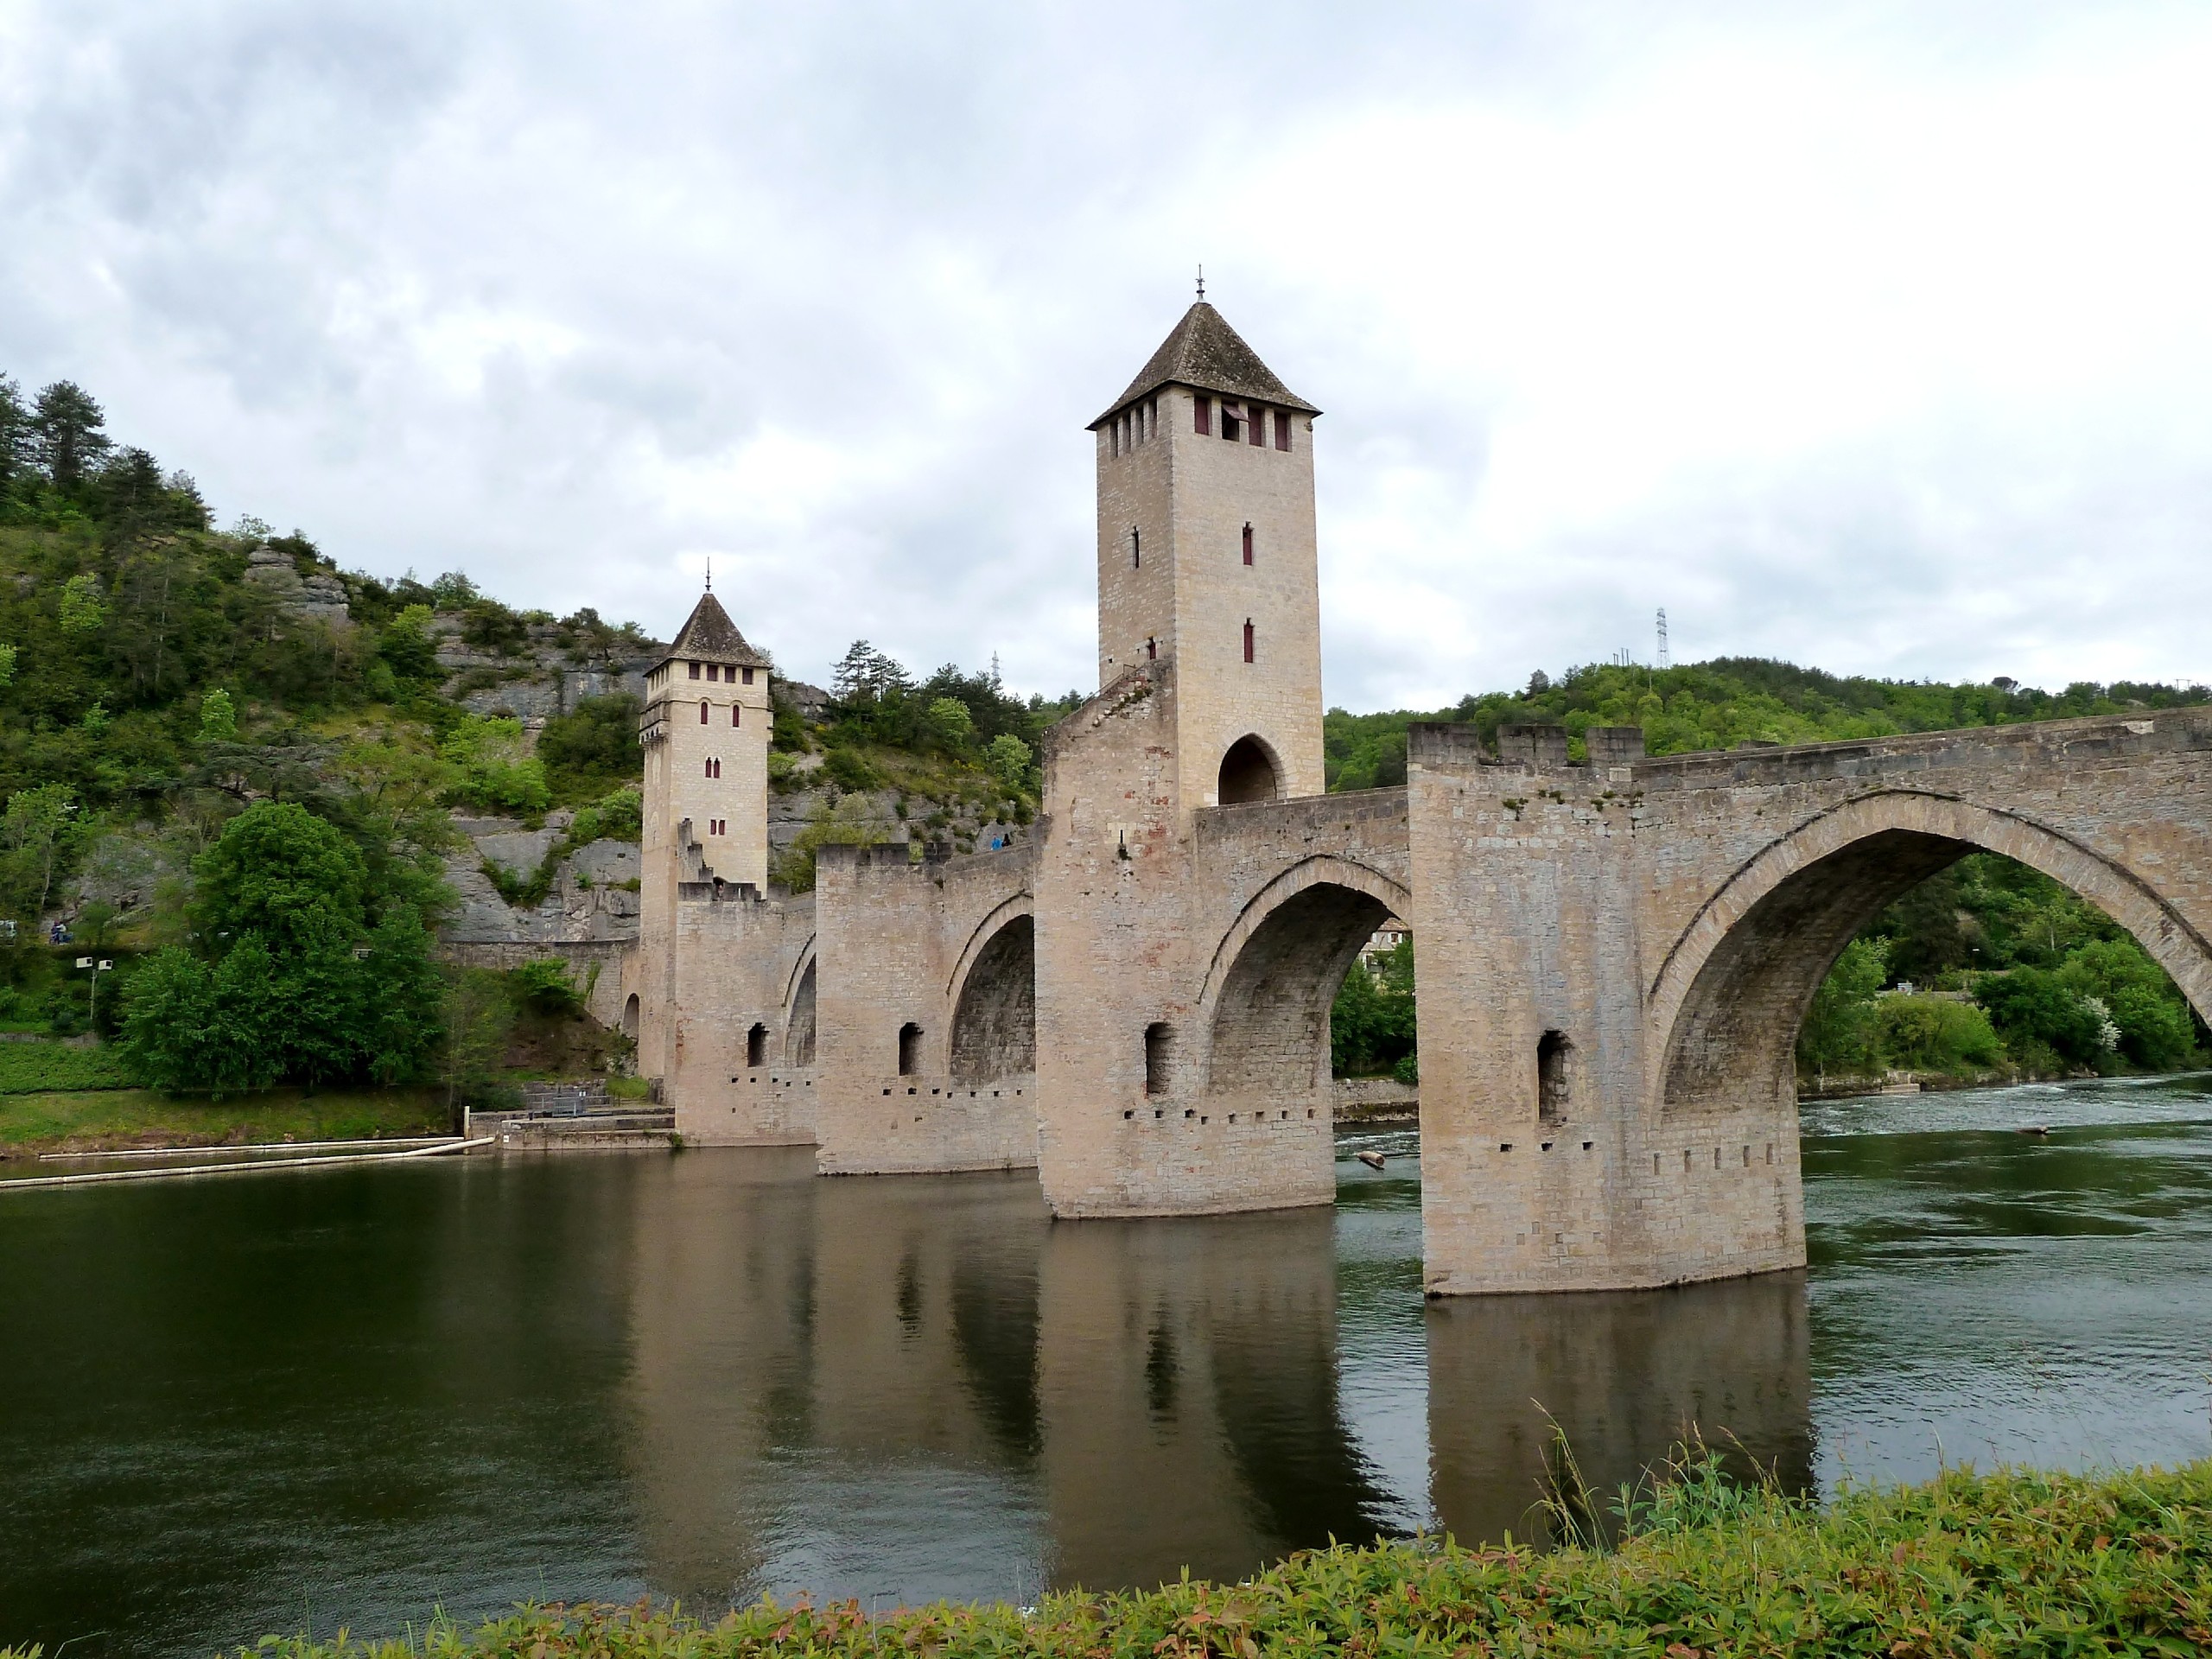 Beautiful architecture in Cahors, along the Le Puy Camino route